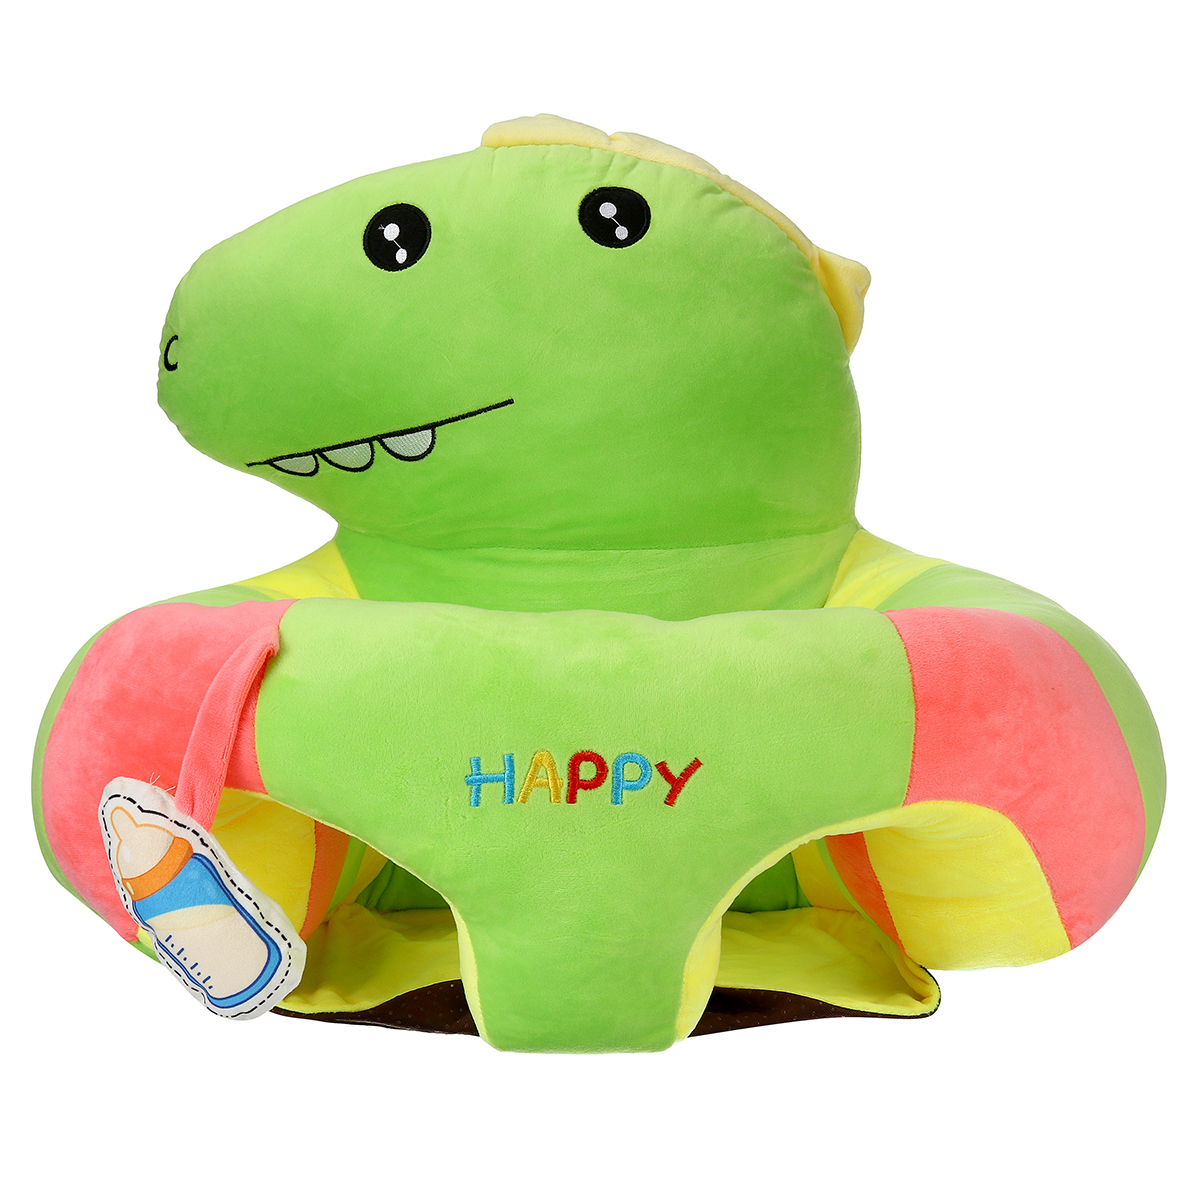 Multi-Style-Kids-Baby-Support-Seats-Sit-Up-Soft-Chair-Sofa-Cartoon-Animal-Kids-Learning-To-Sit-Plush-1817560-4